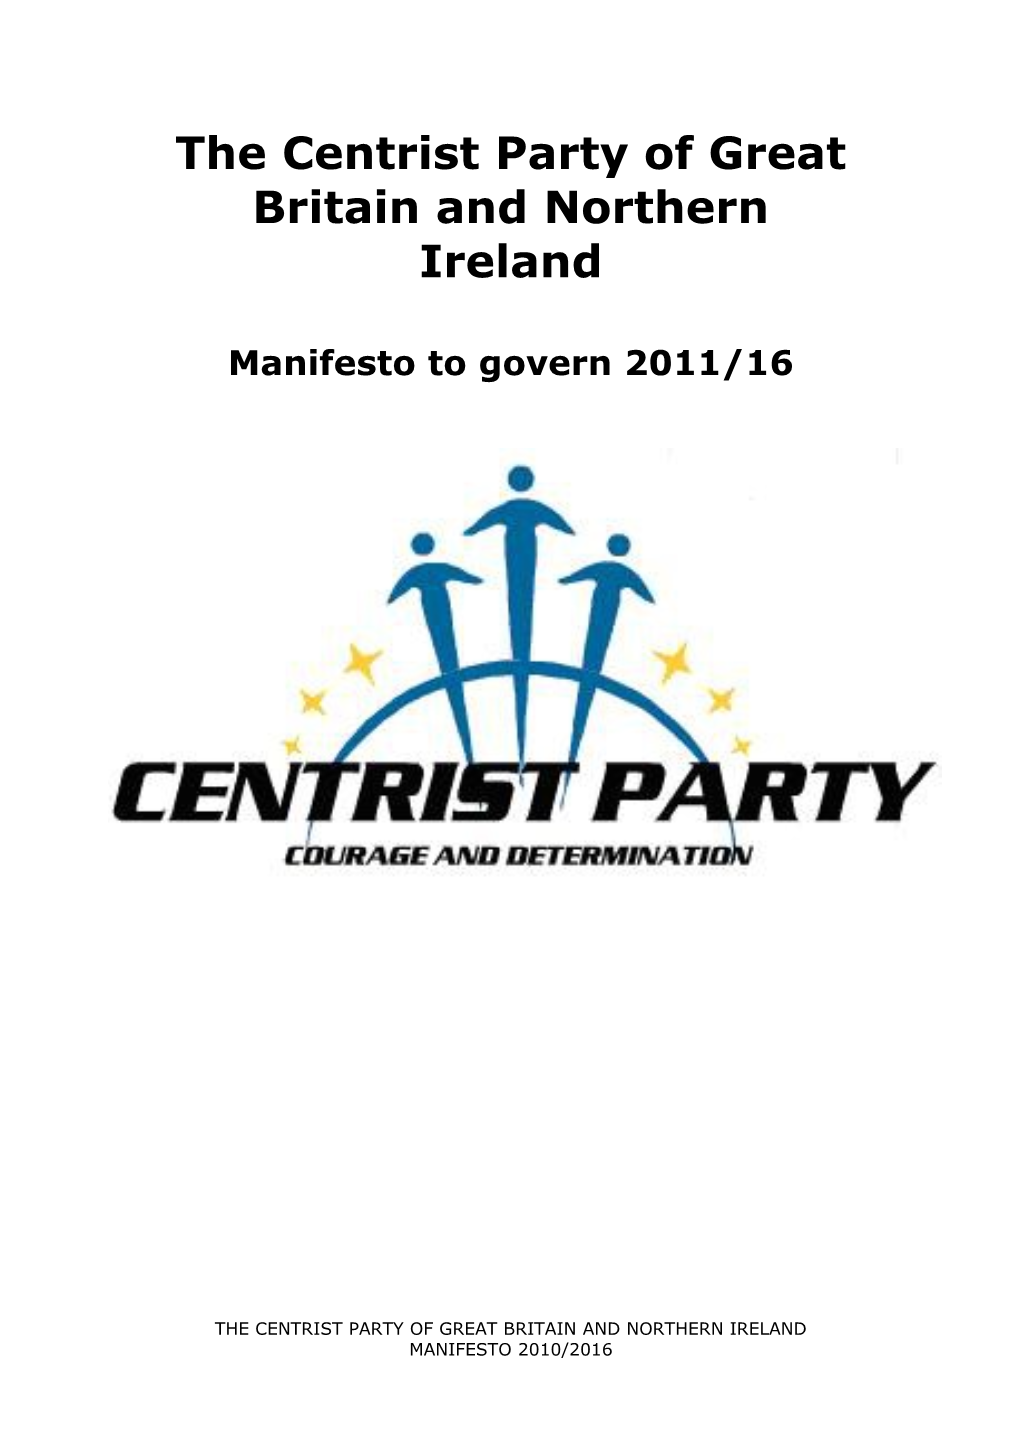 The Centrist Party of Great Britain and Northern Ireland